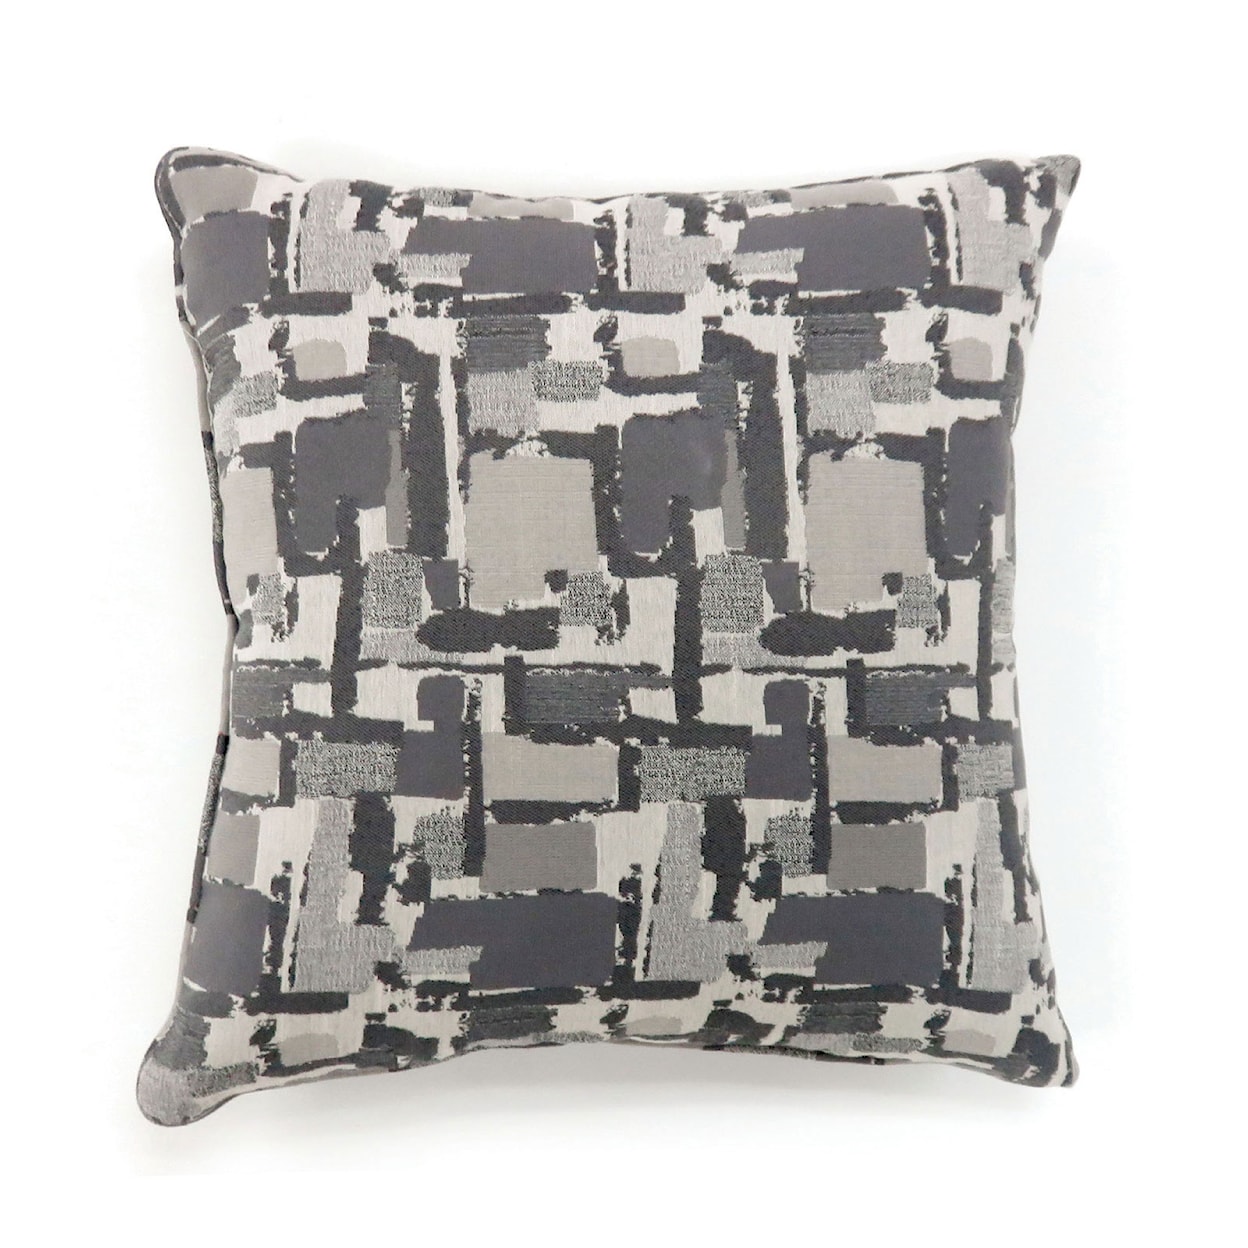 Furniture of America Concrit Set of Two 18" X 18" Pillows, Gray